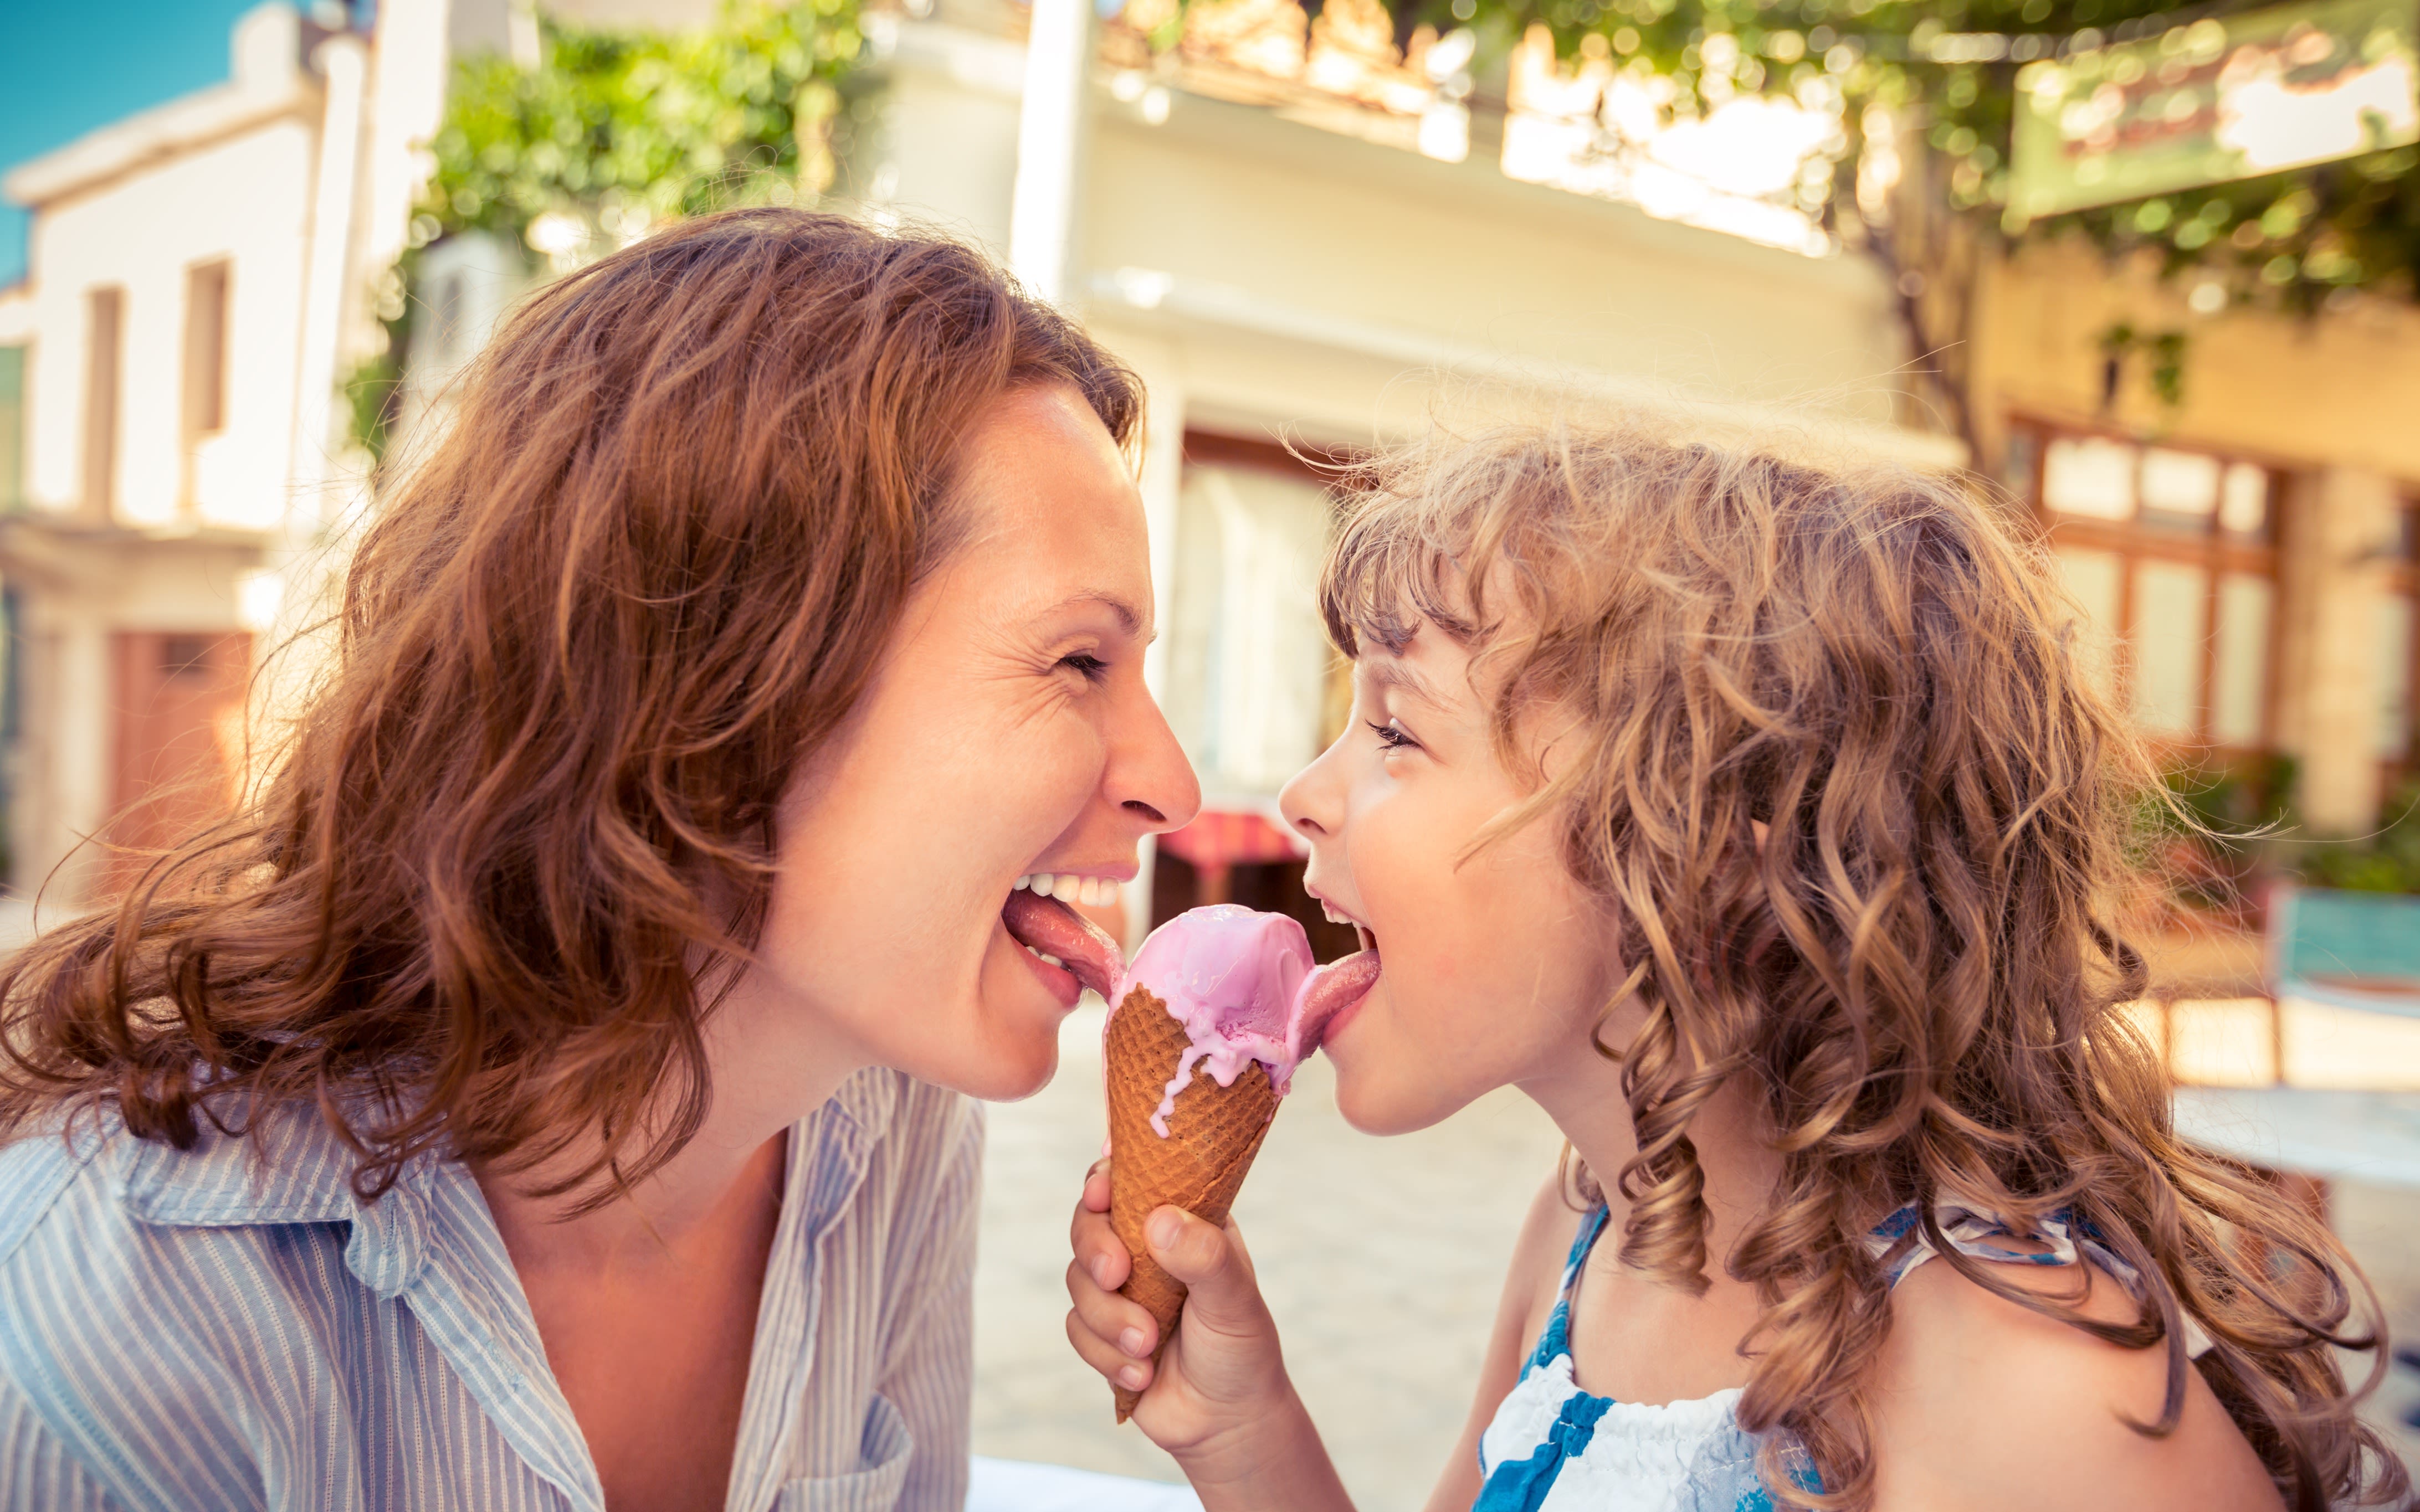 Mother and child eating ice cream in summer cafe outdoors.